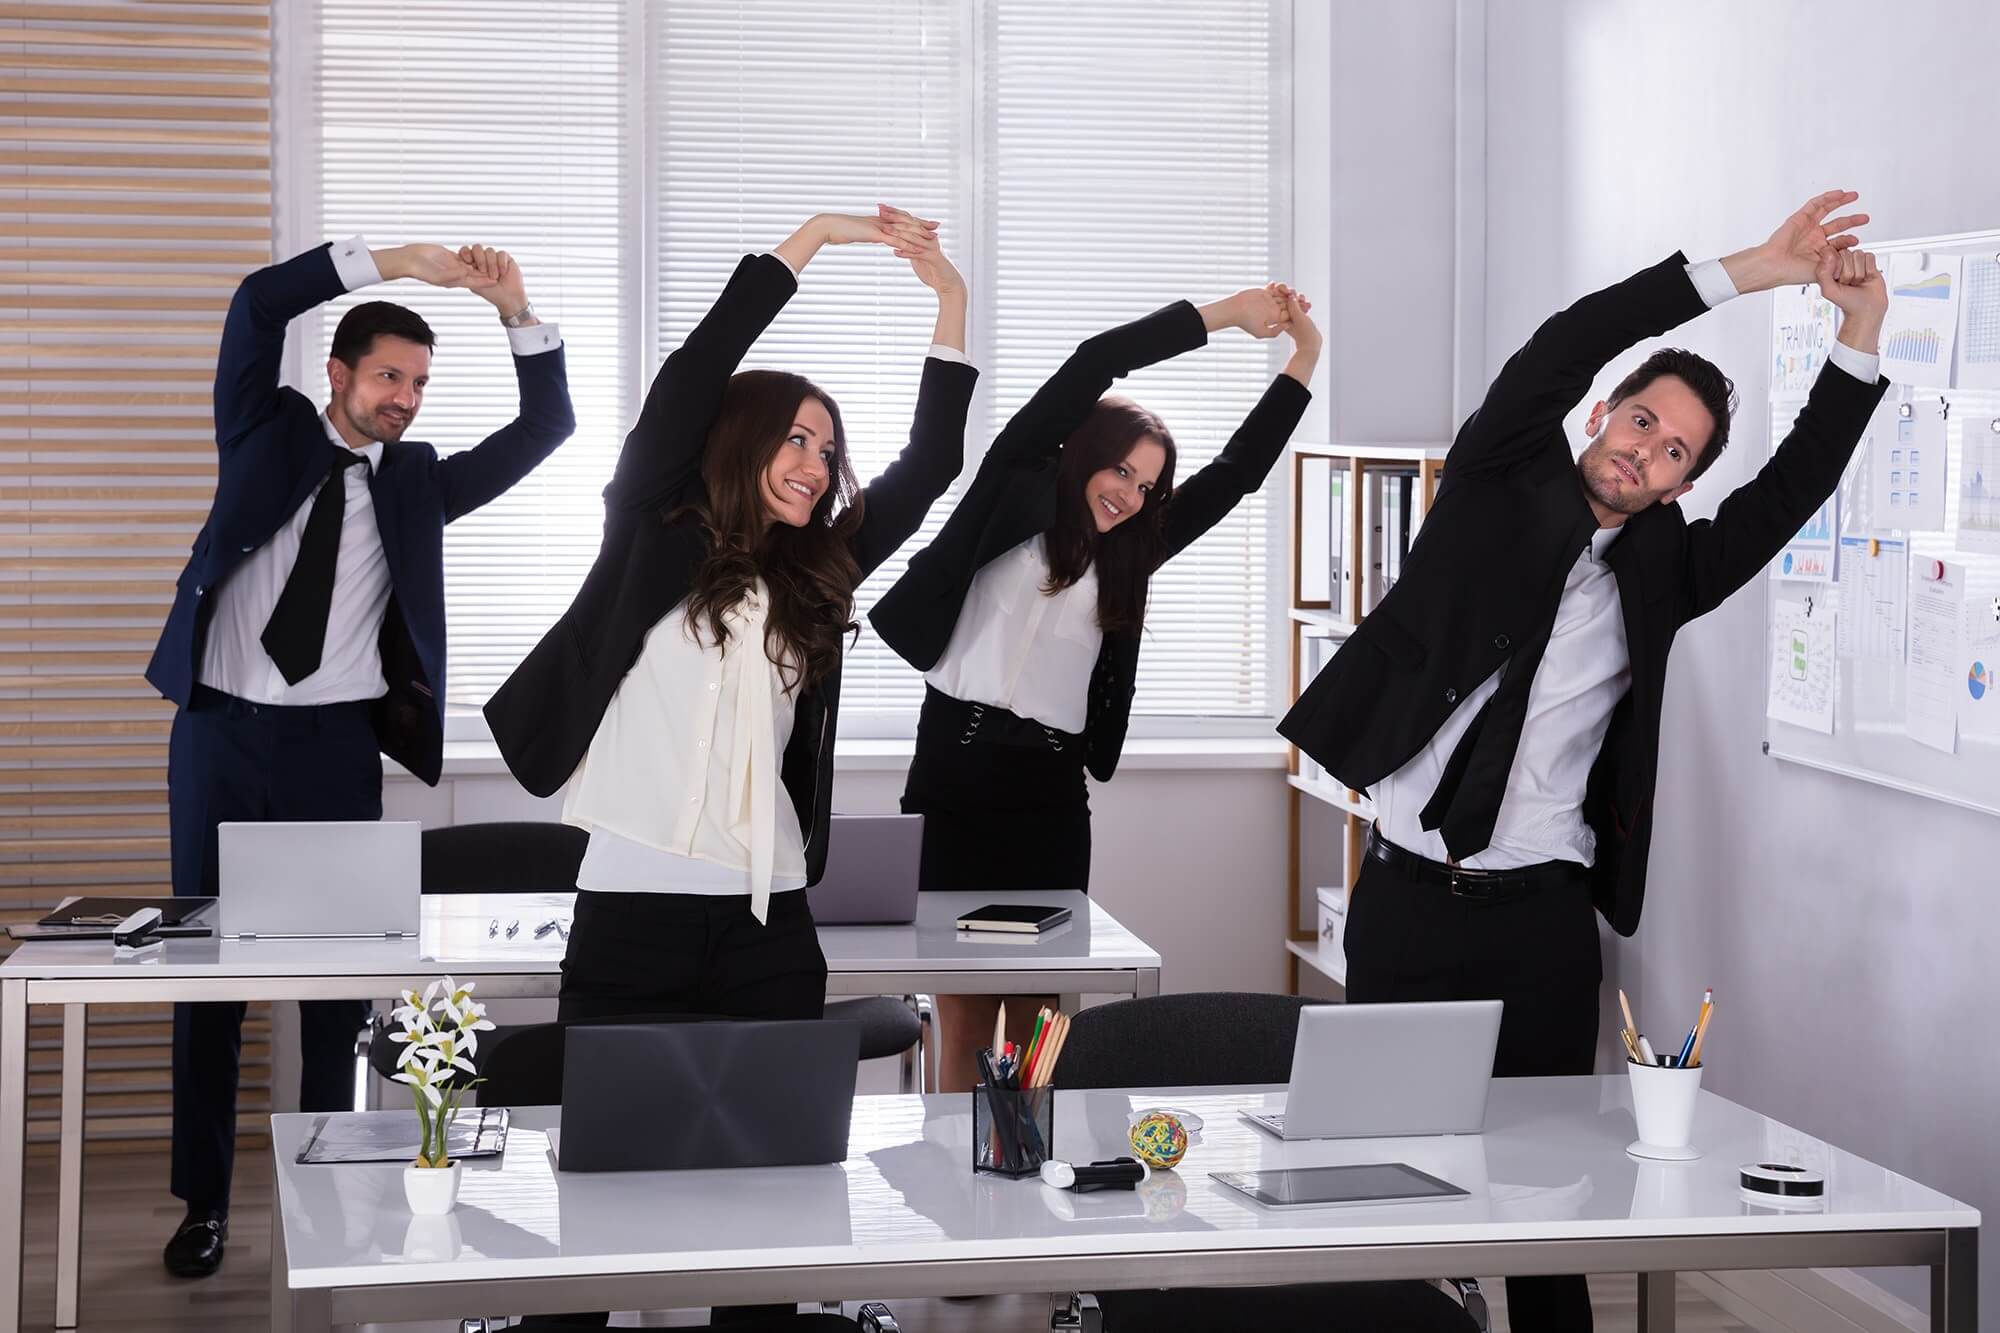 7 exercises you can do at your desk